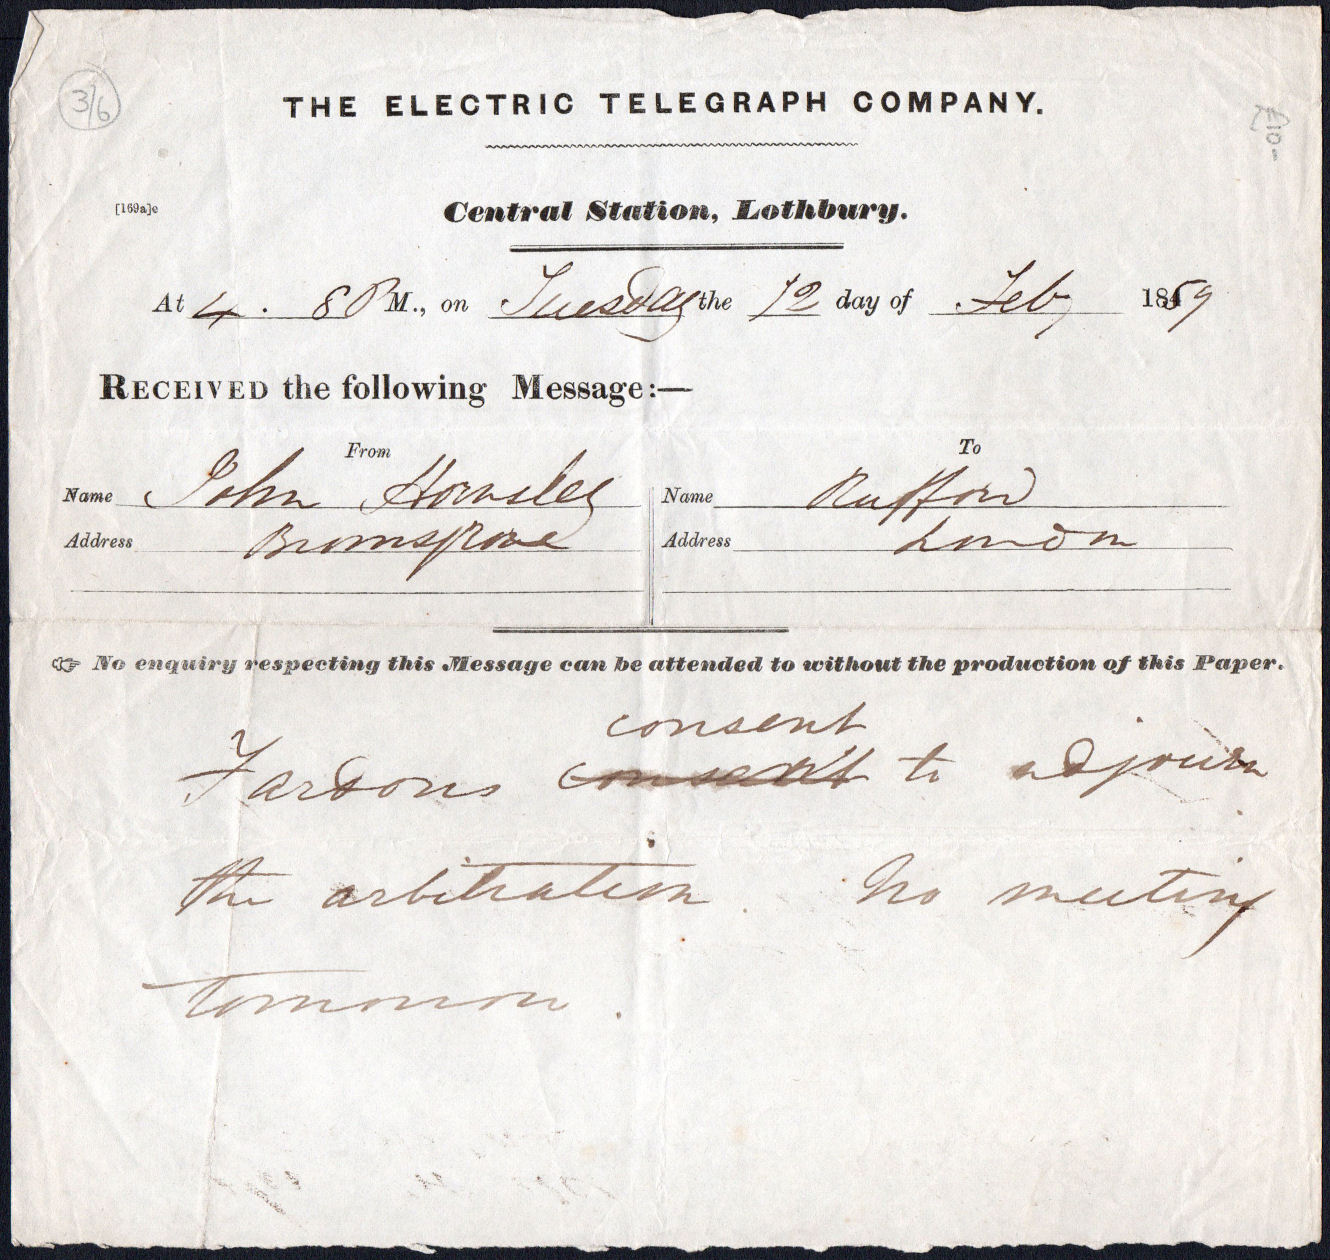 Electric Telegraph Co Form 169a.